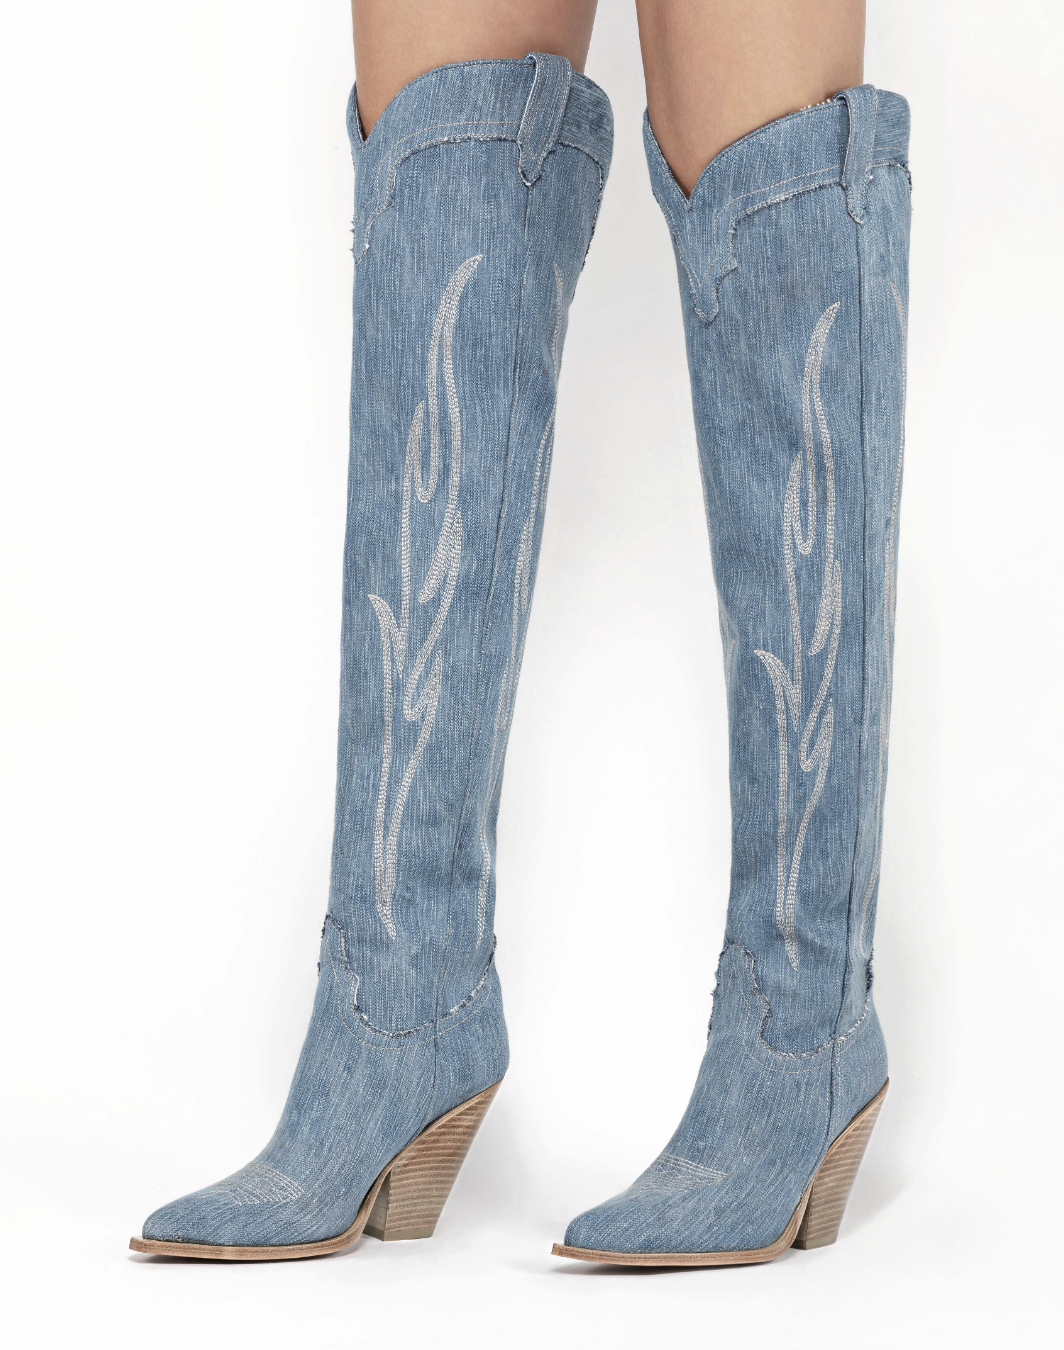 HERMOSA Over The Knee Boots in Blue Jeans